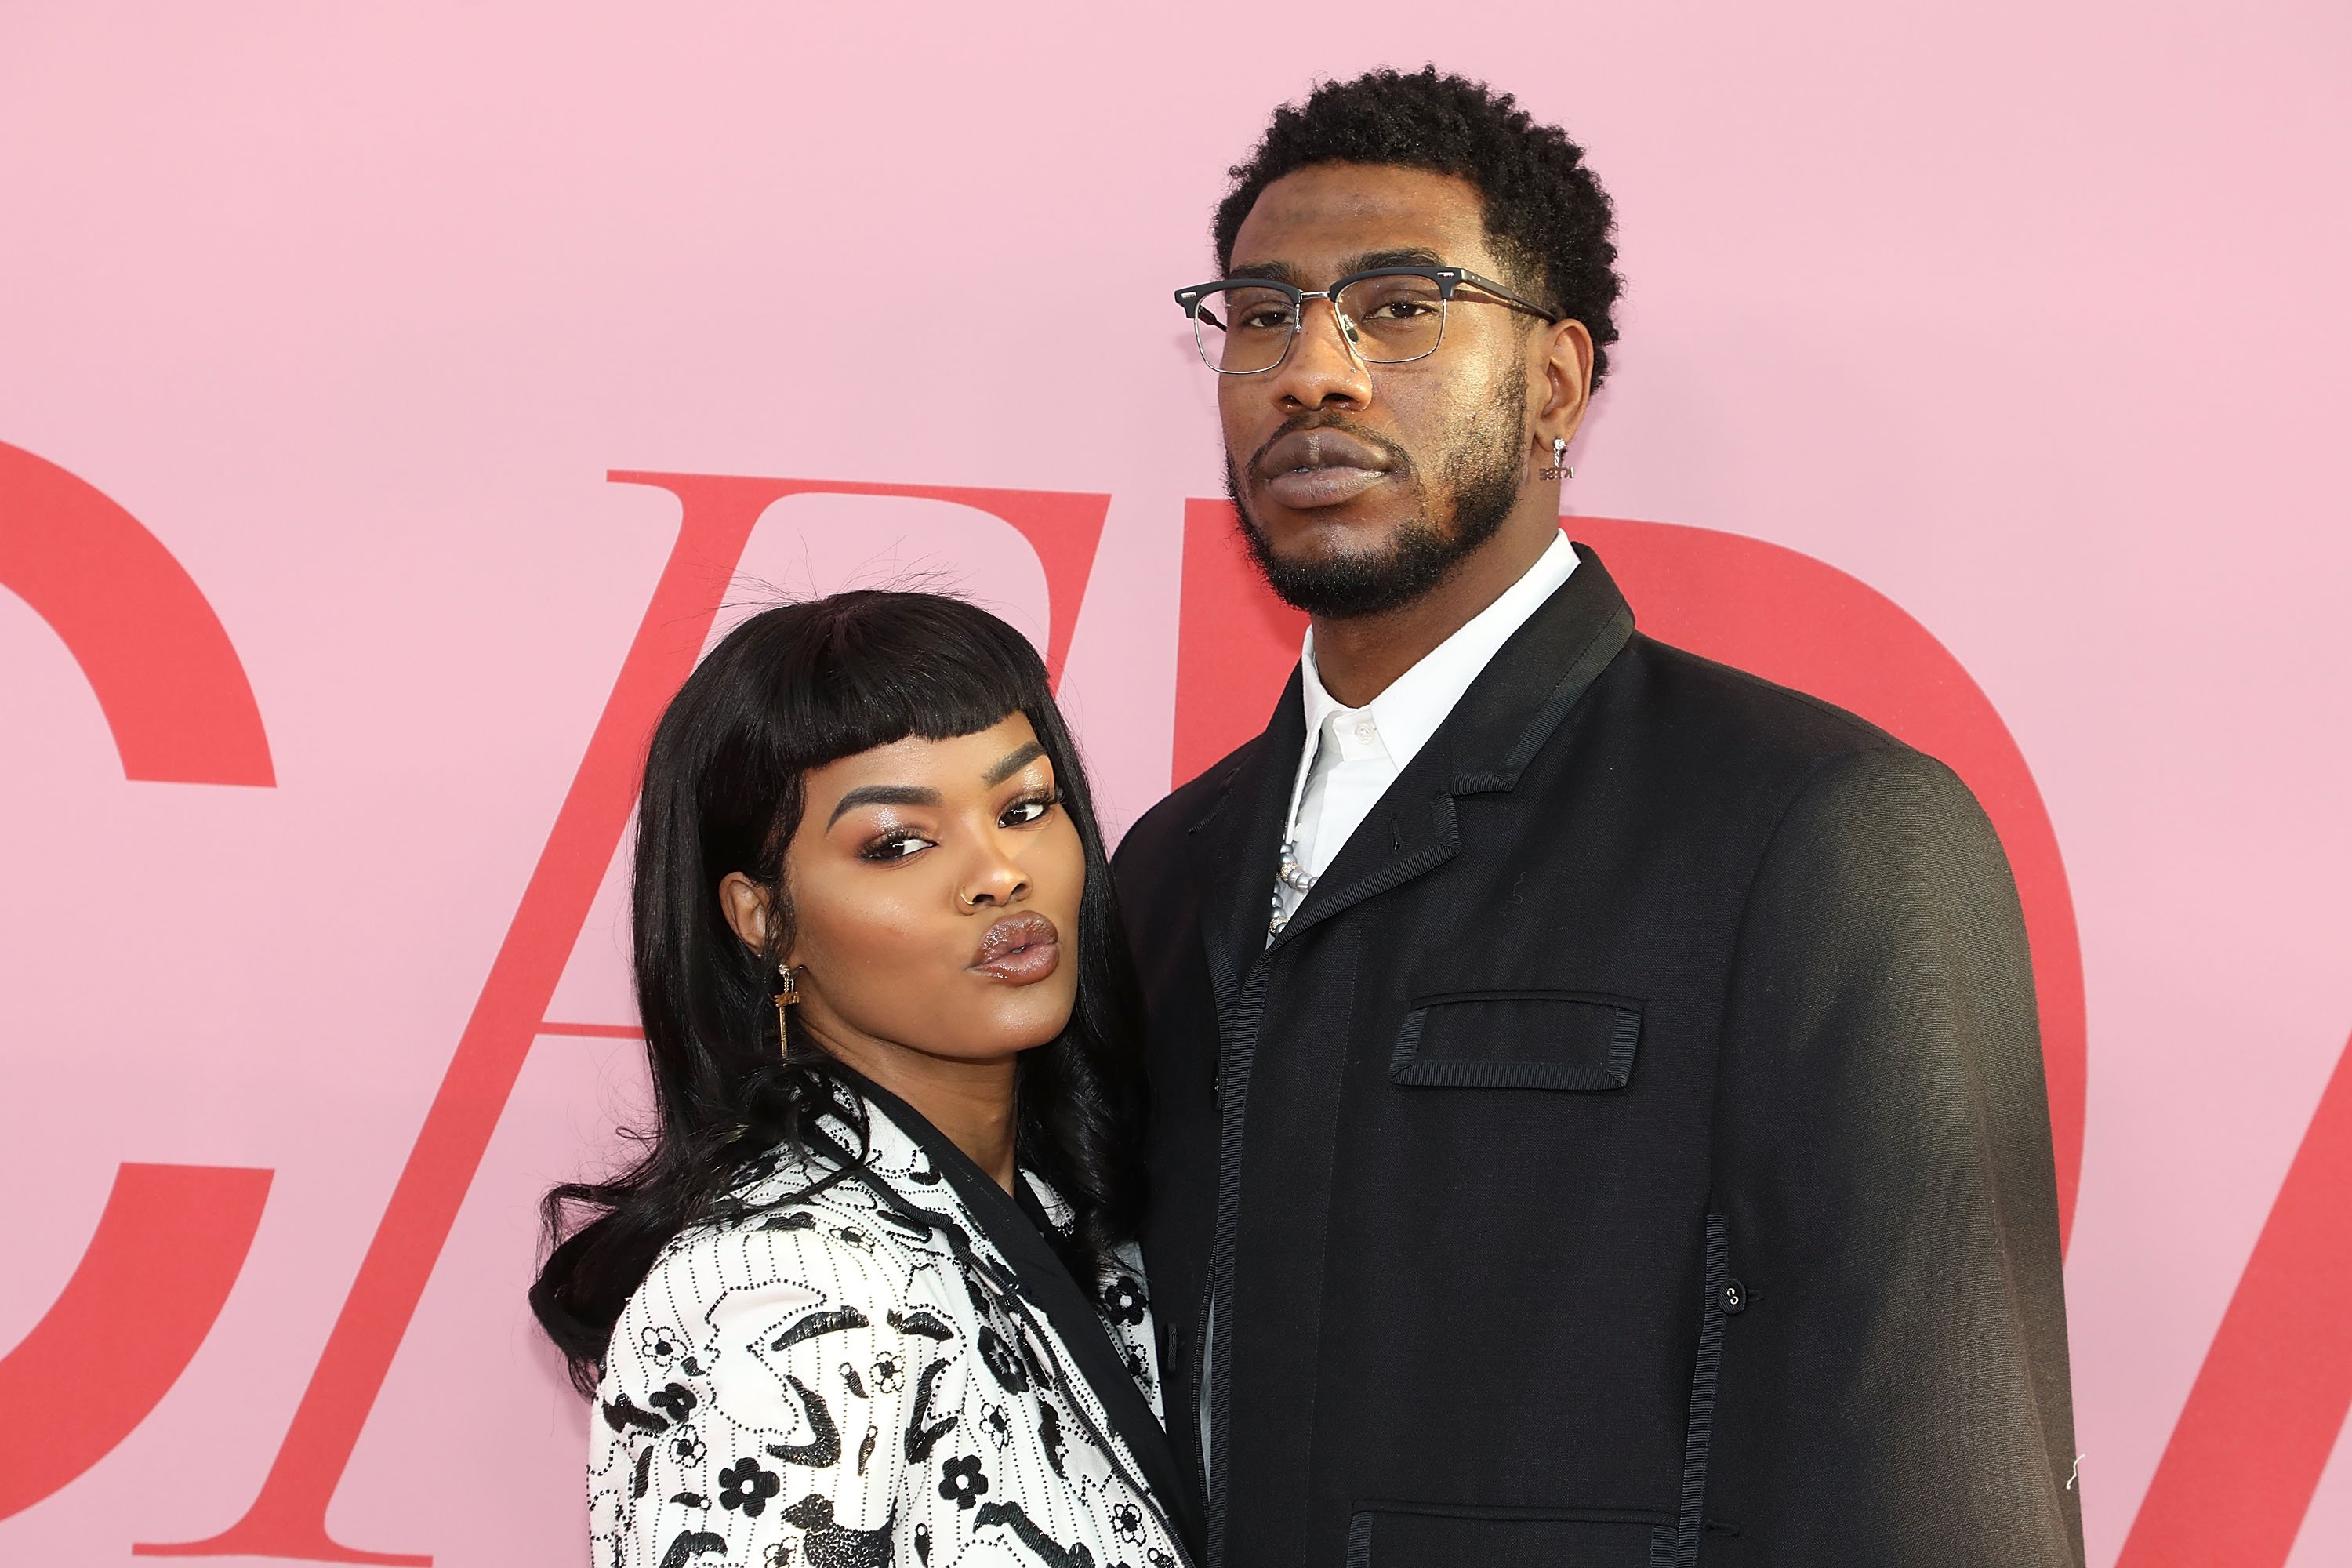 Teyana Taylor and Iman Shumpert at the 2019 CFDA Awards on June 3, 2019 in New York City. | Source: Getty Images